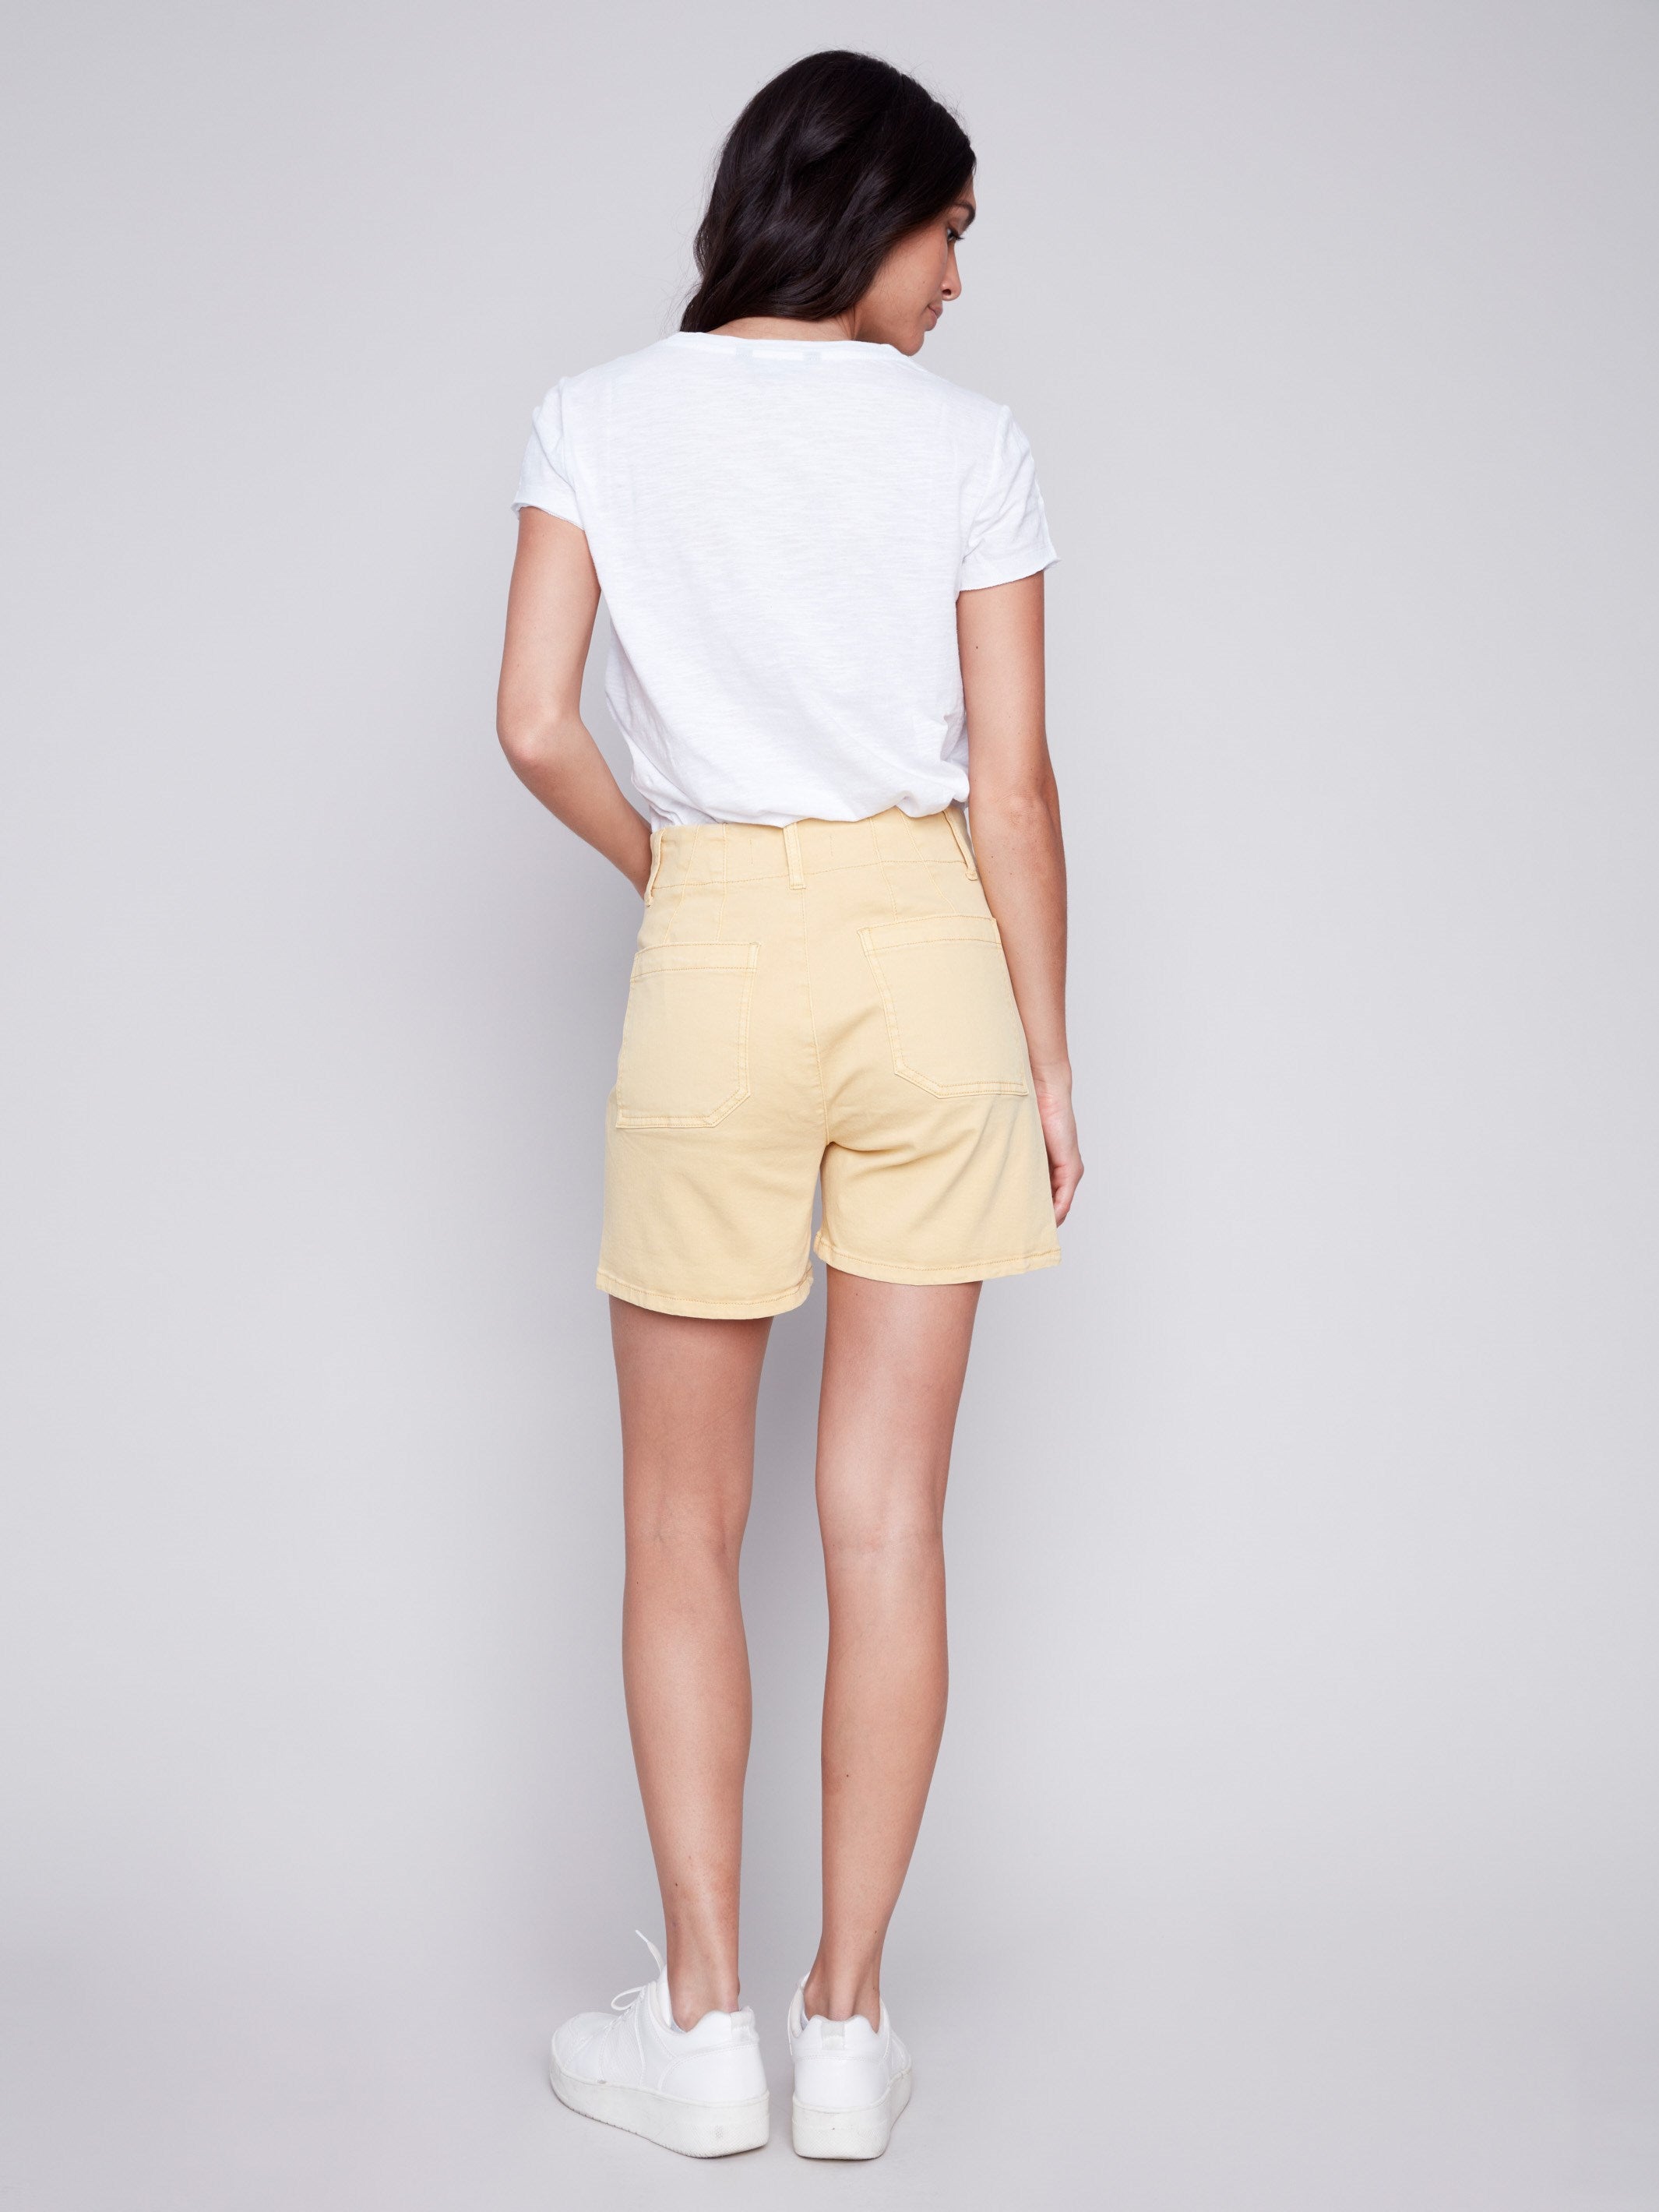 Charlie B Shorts with Patch Pockets - Lemon - Image 2